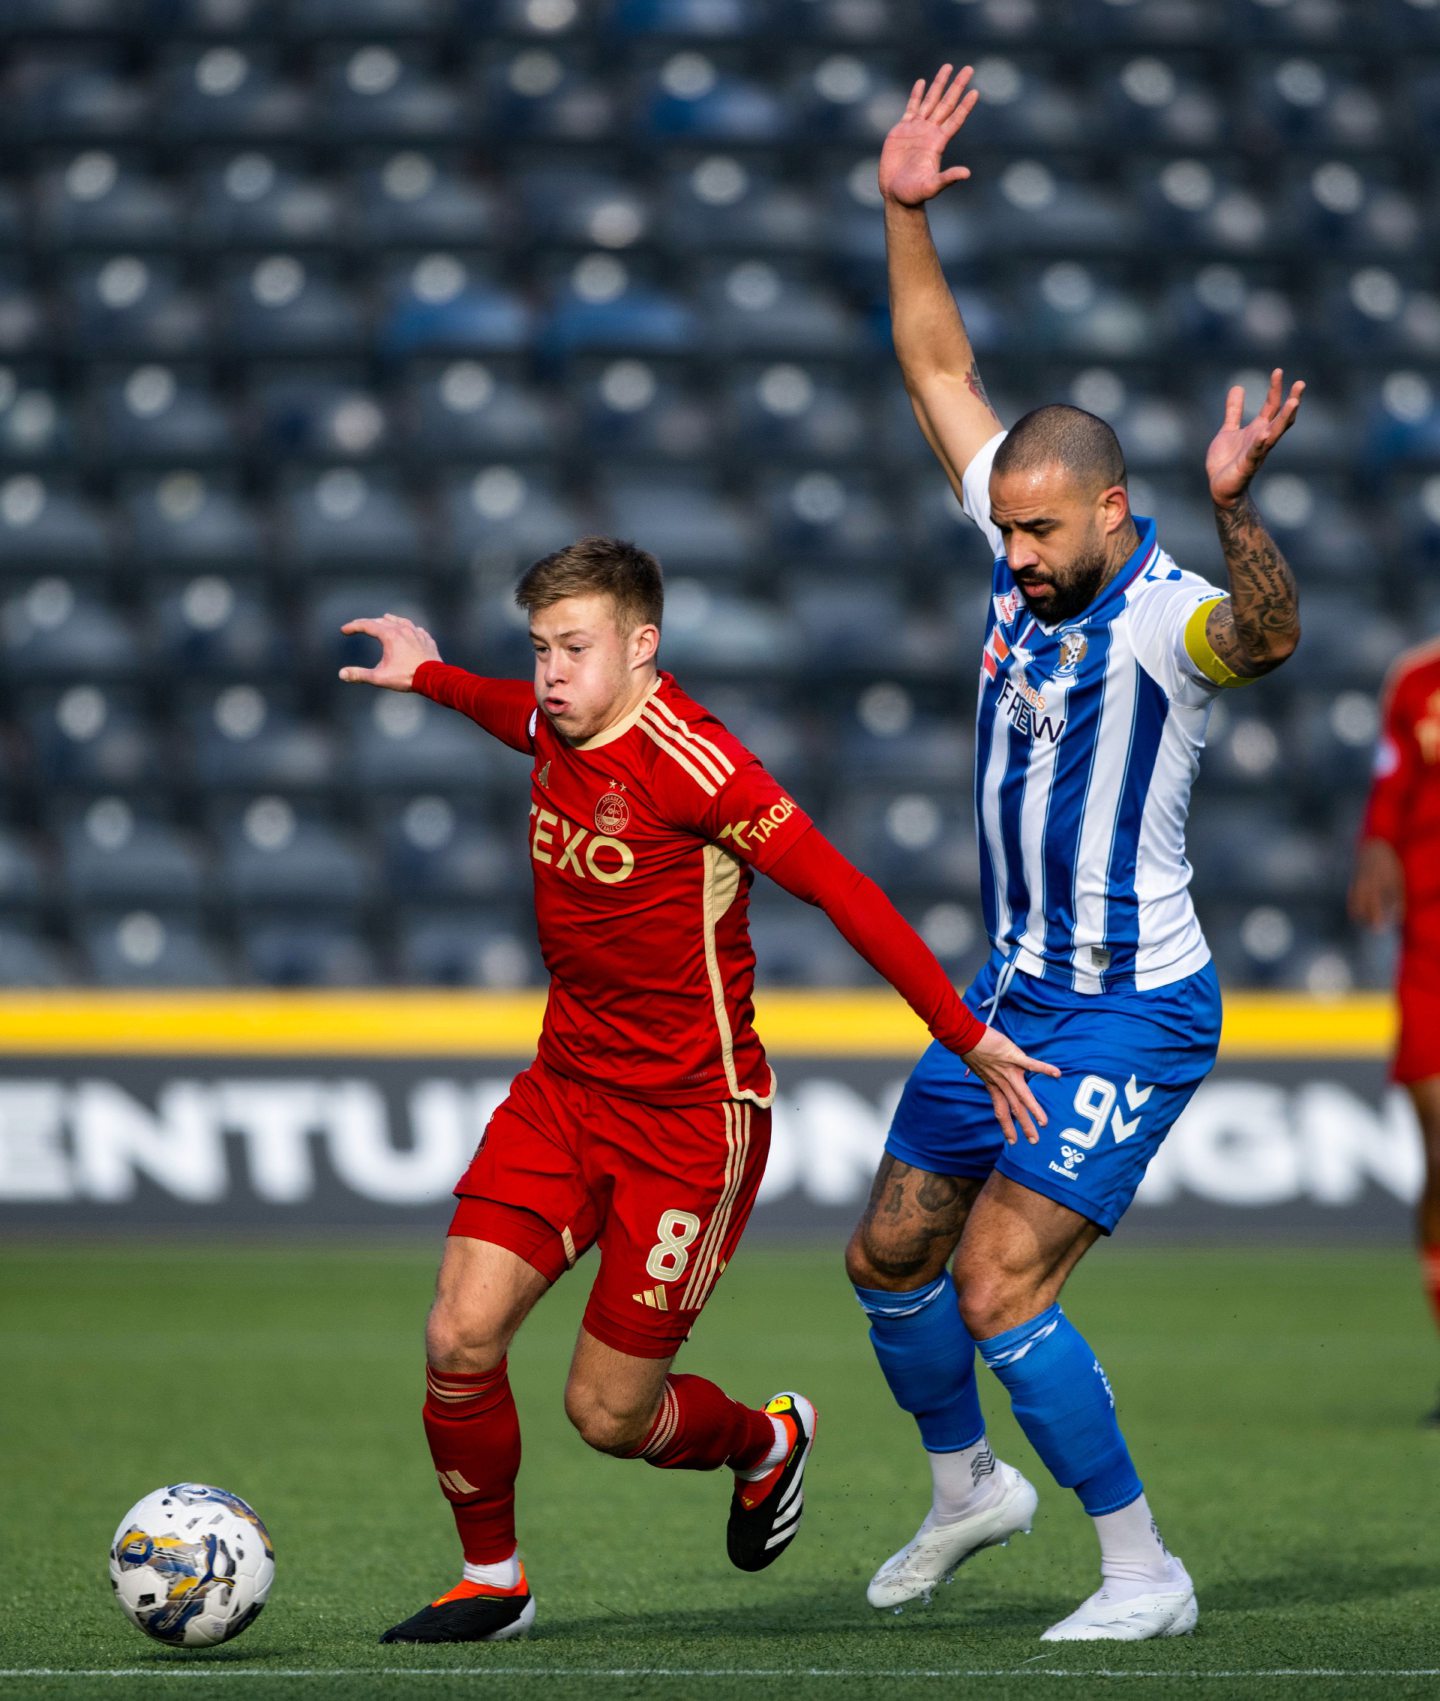 Kilmarnock's Kyle Vassell and Aberdeen's Connor Barron in action in a Premiership clash. Image: SNS 